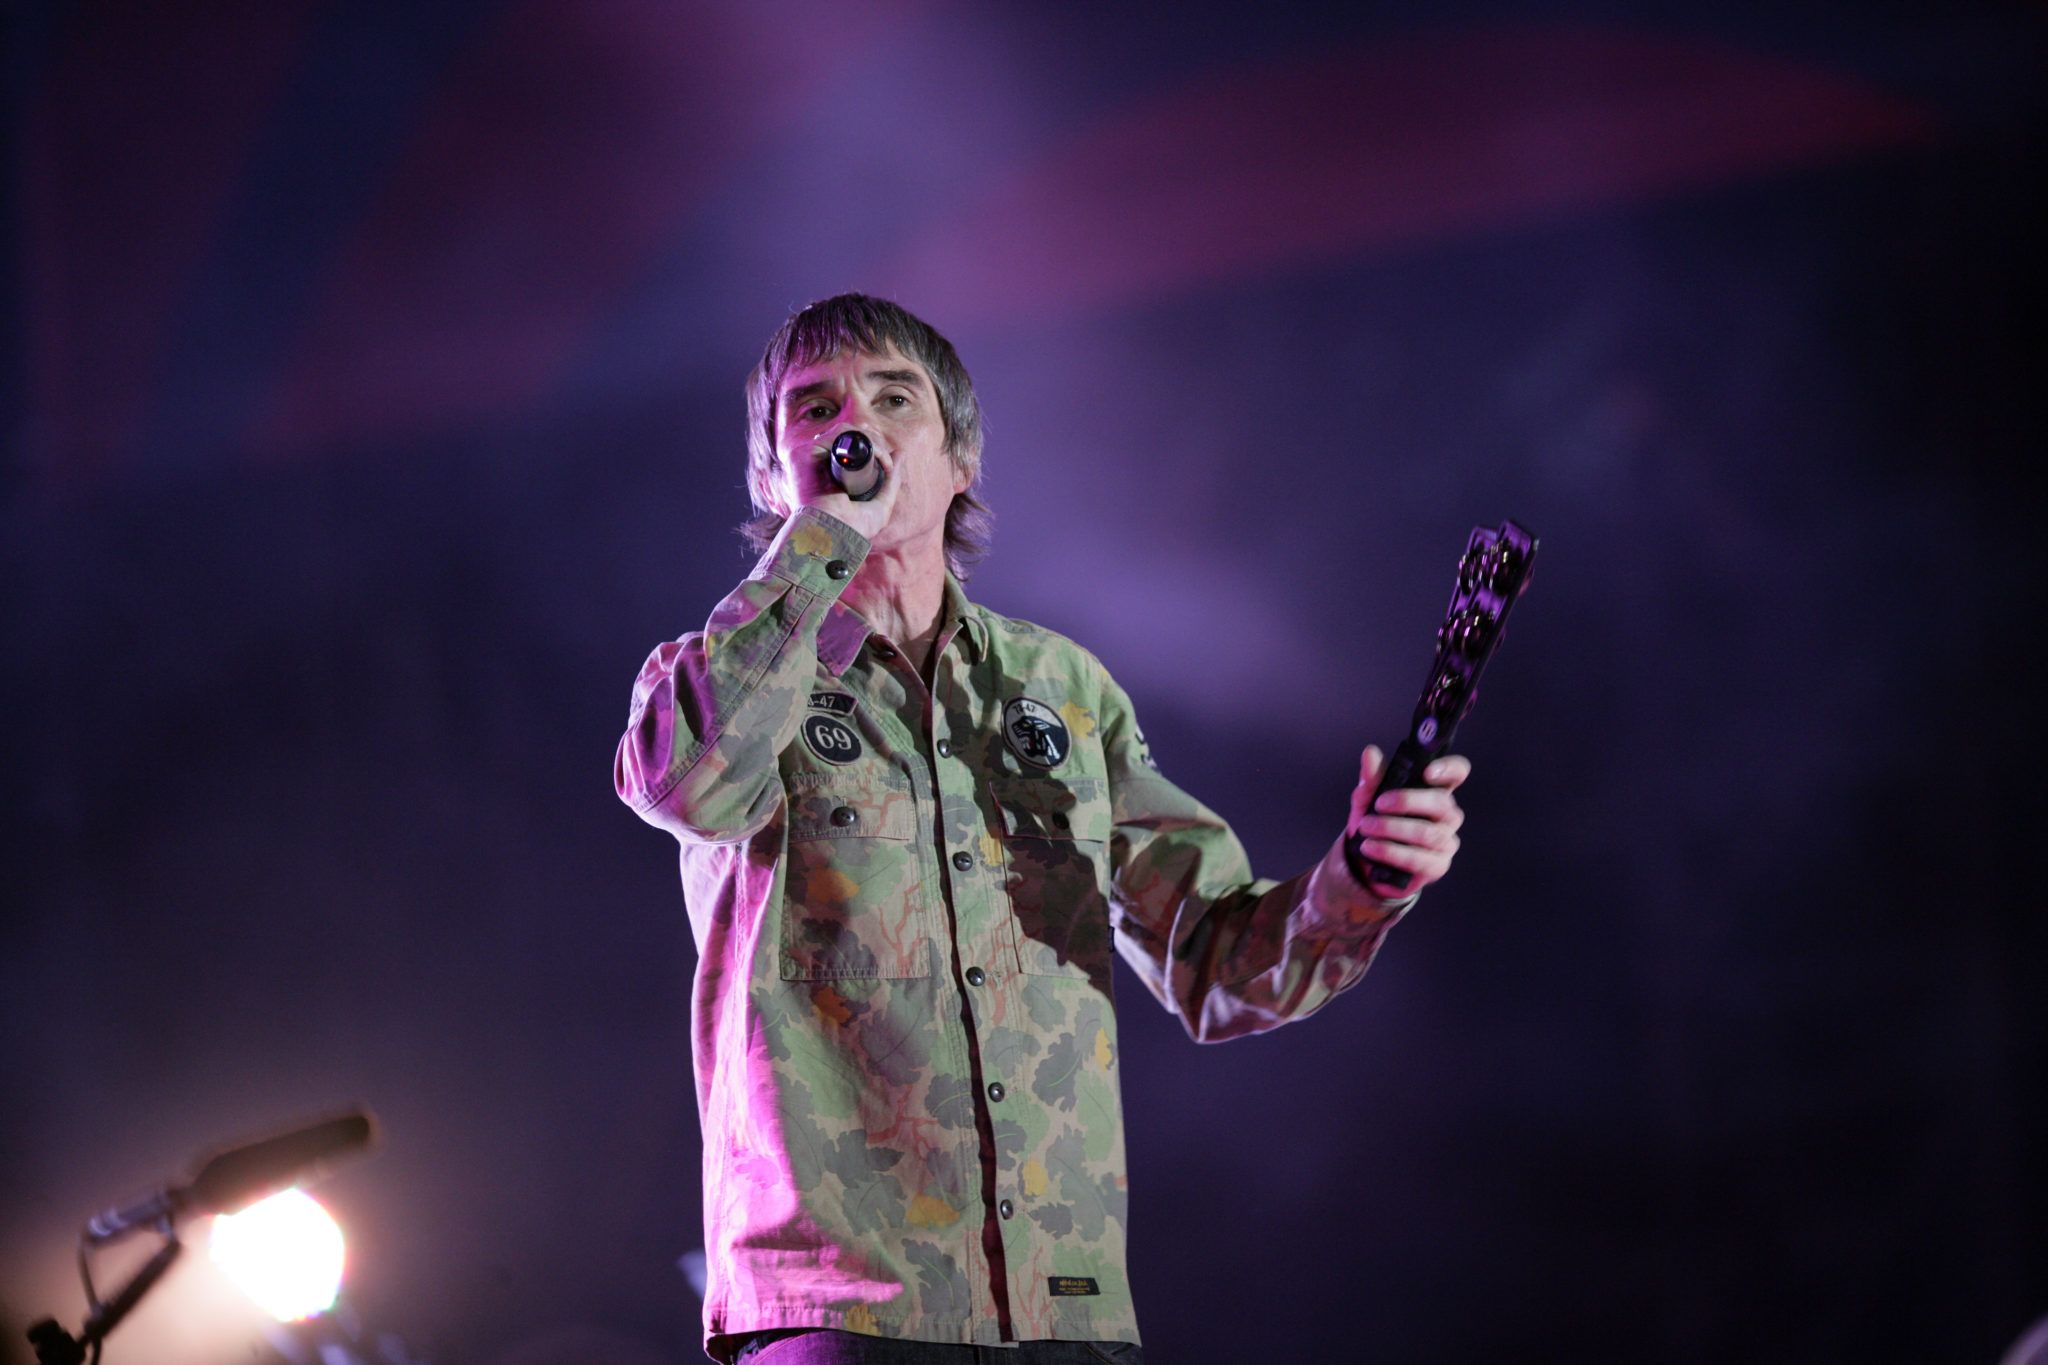 Stone Roses frontman Ian Brown has announced six Irish shows for this summer